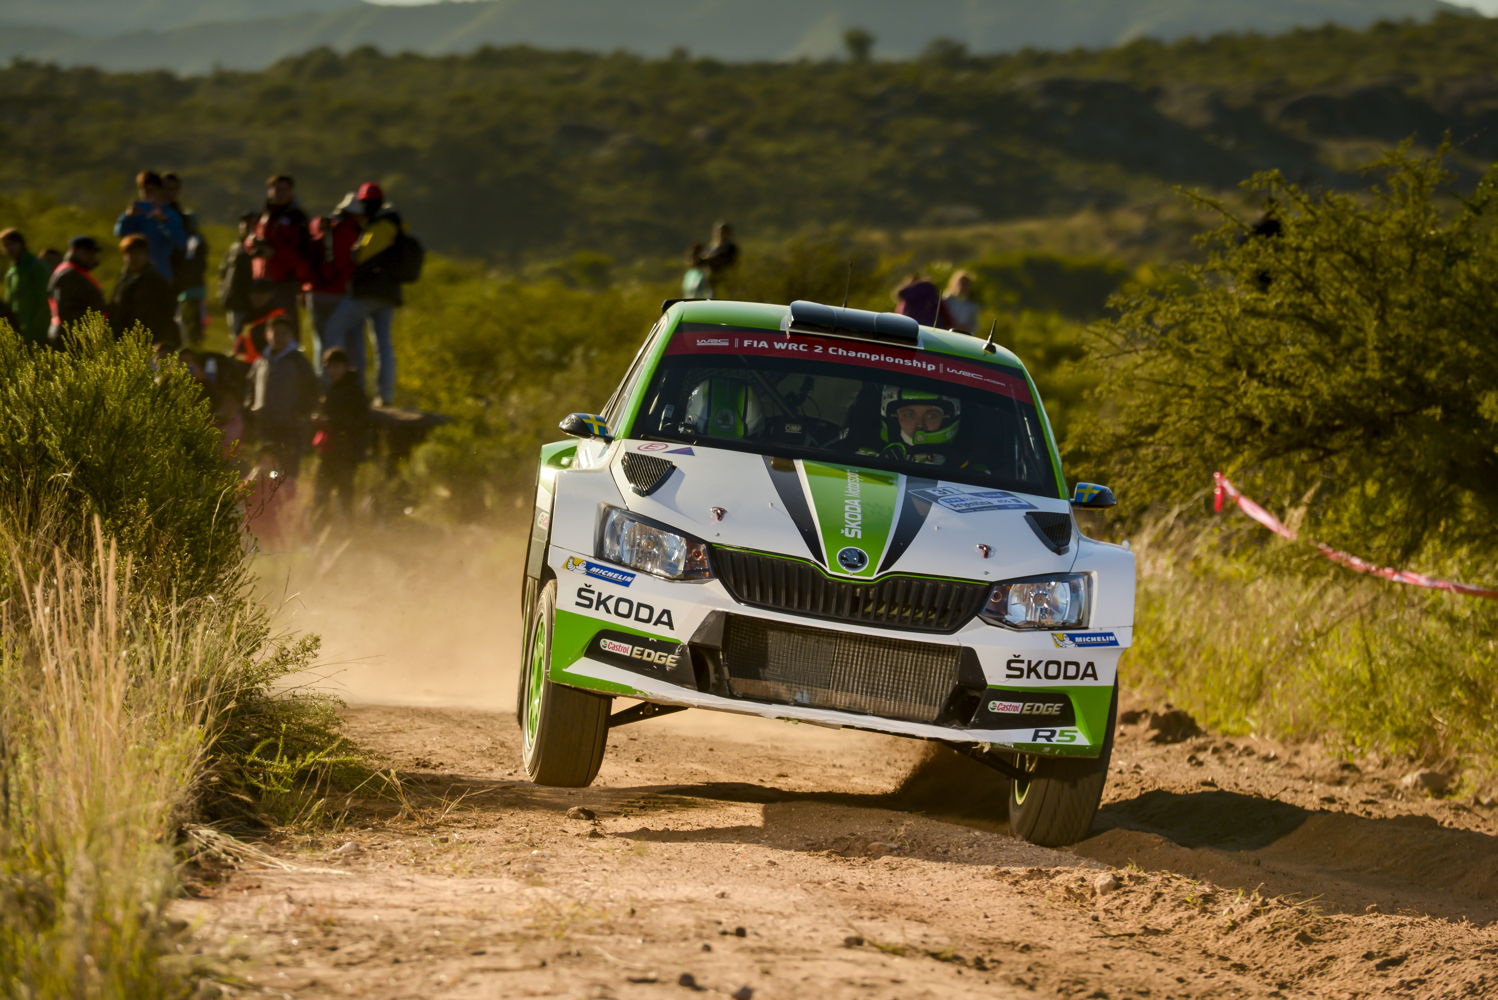 Pontus Tidemand/Jonas Andersson (SWE/SWE), driving a ŠKODA FABIA R5, want to repeat their WRC 2 victory from last year to take the lead in the WRC 2 standings